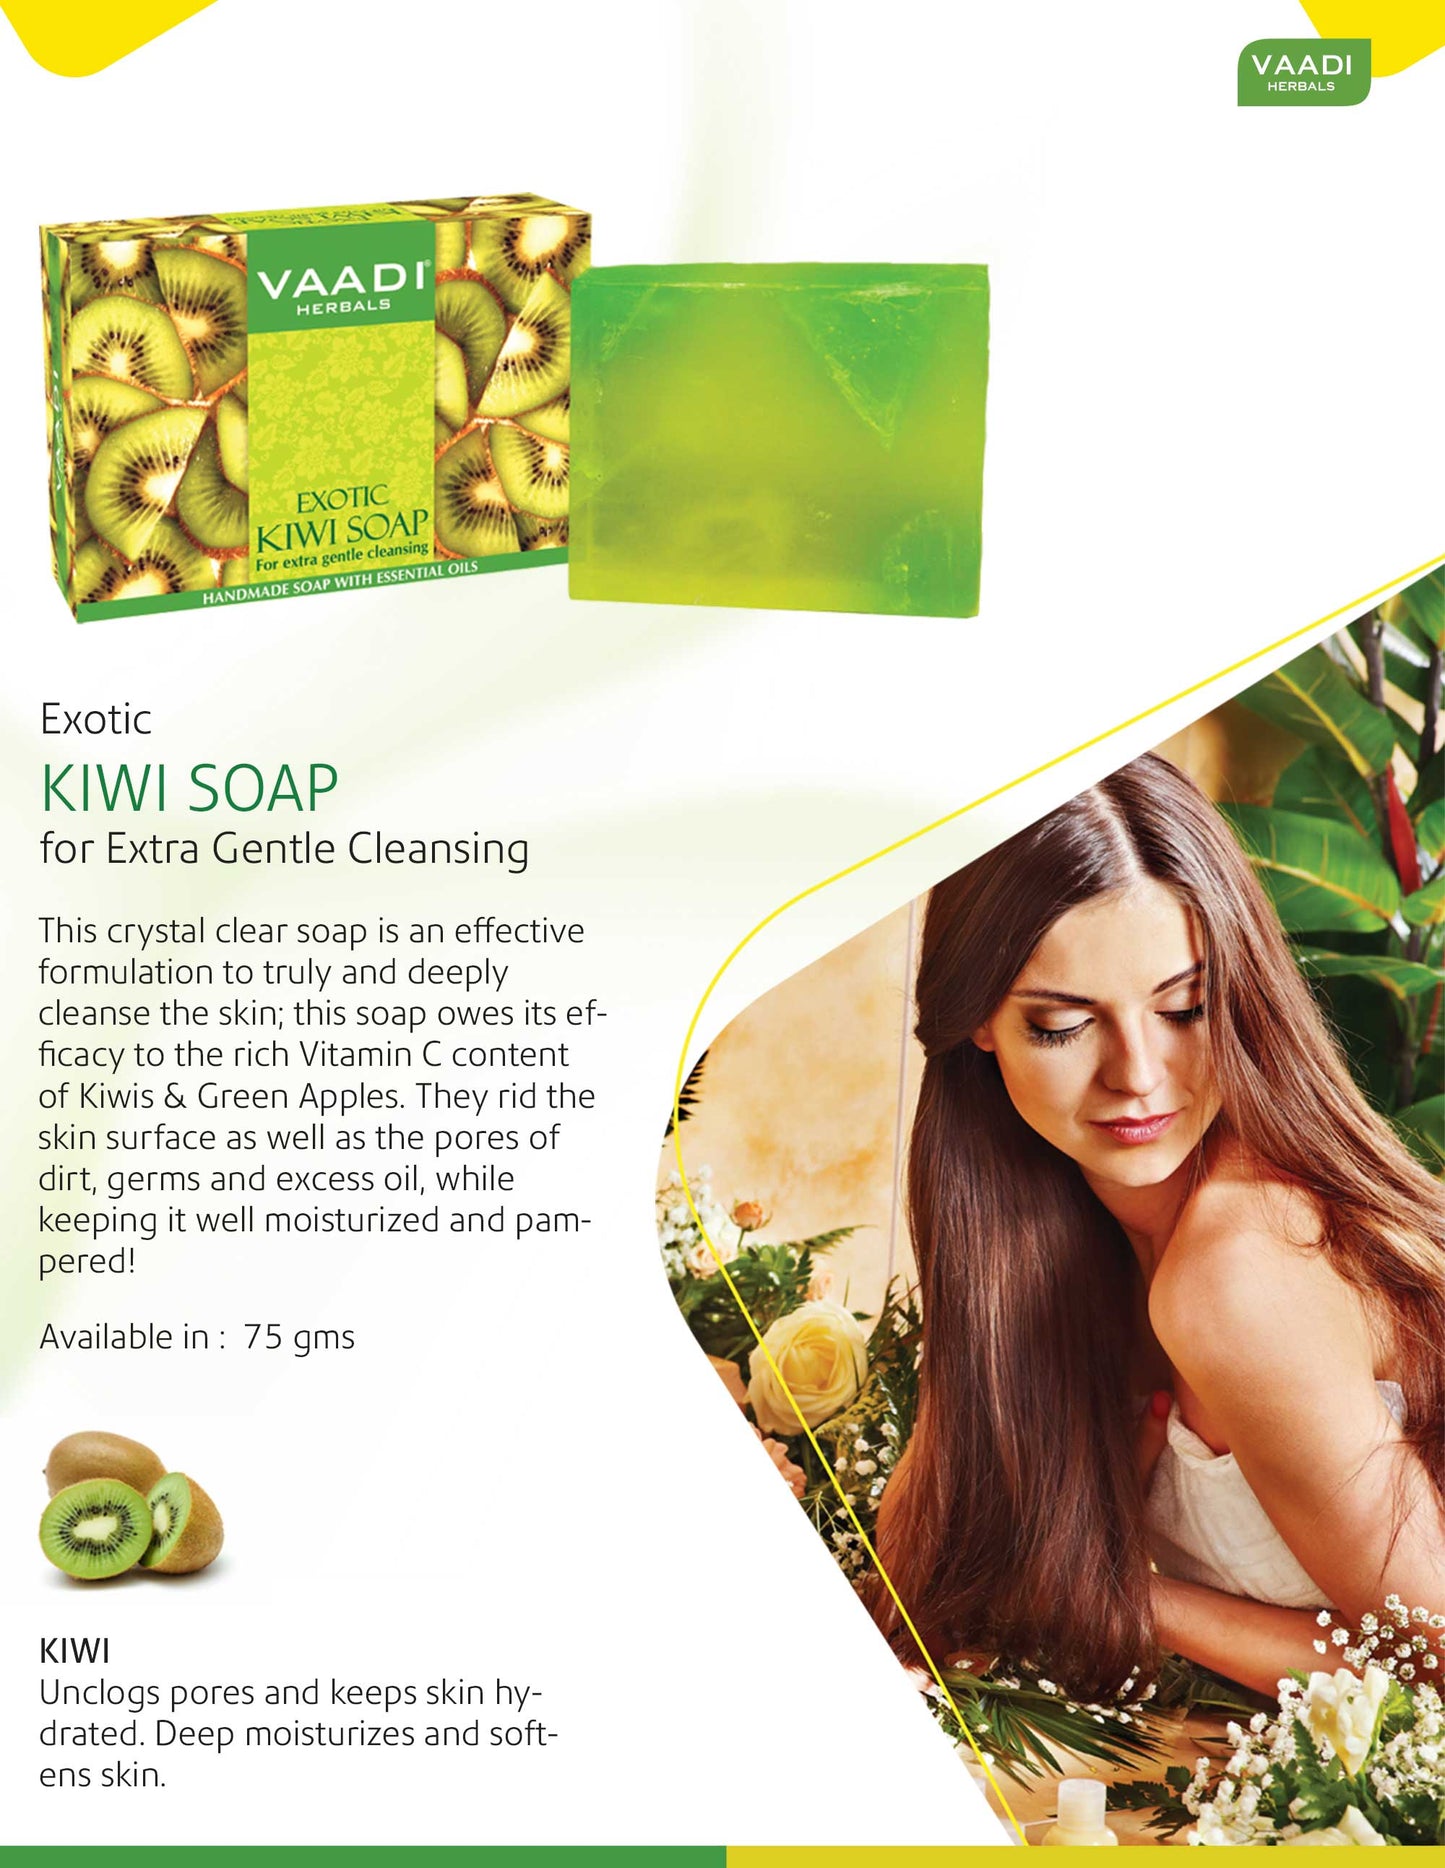 Exotic Organic Kiwi Soap with Green Apple Extract - Gently Clears Skin- Makes Skin Glowing (75 gms / 2.7 oz)